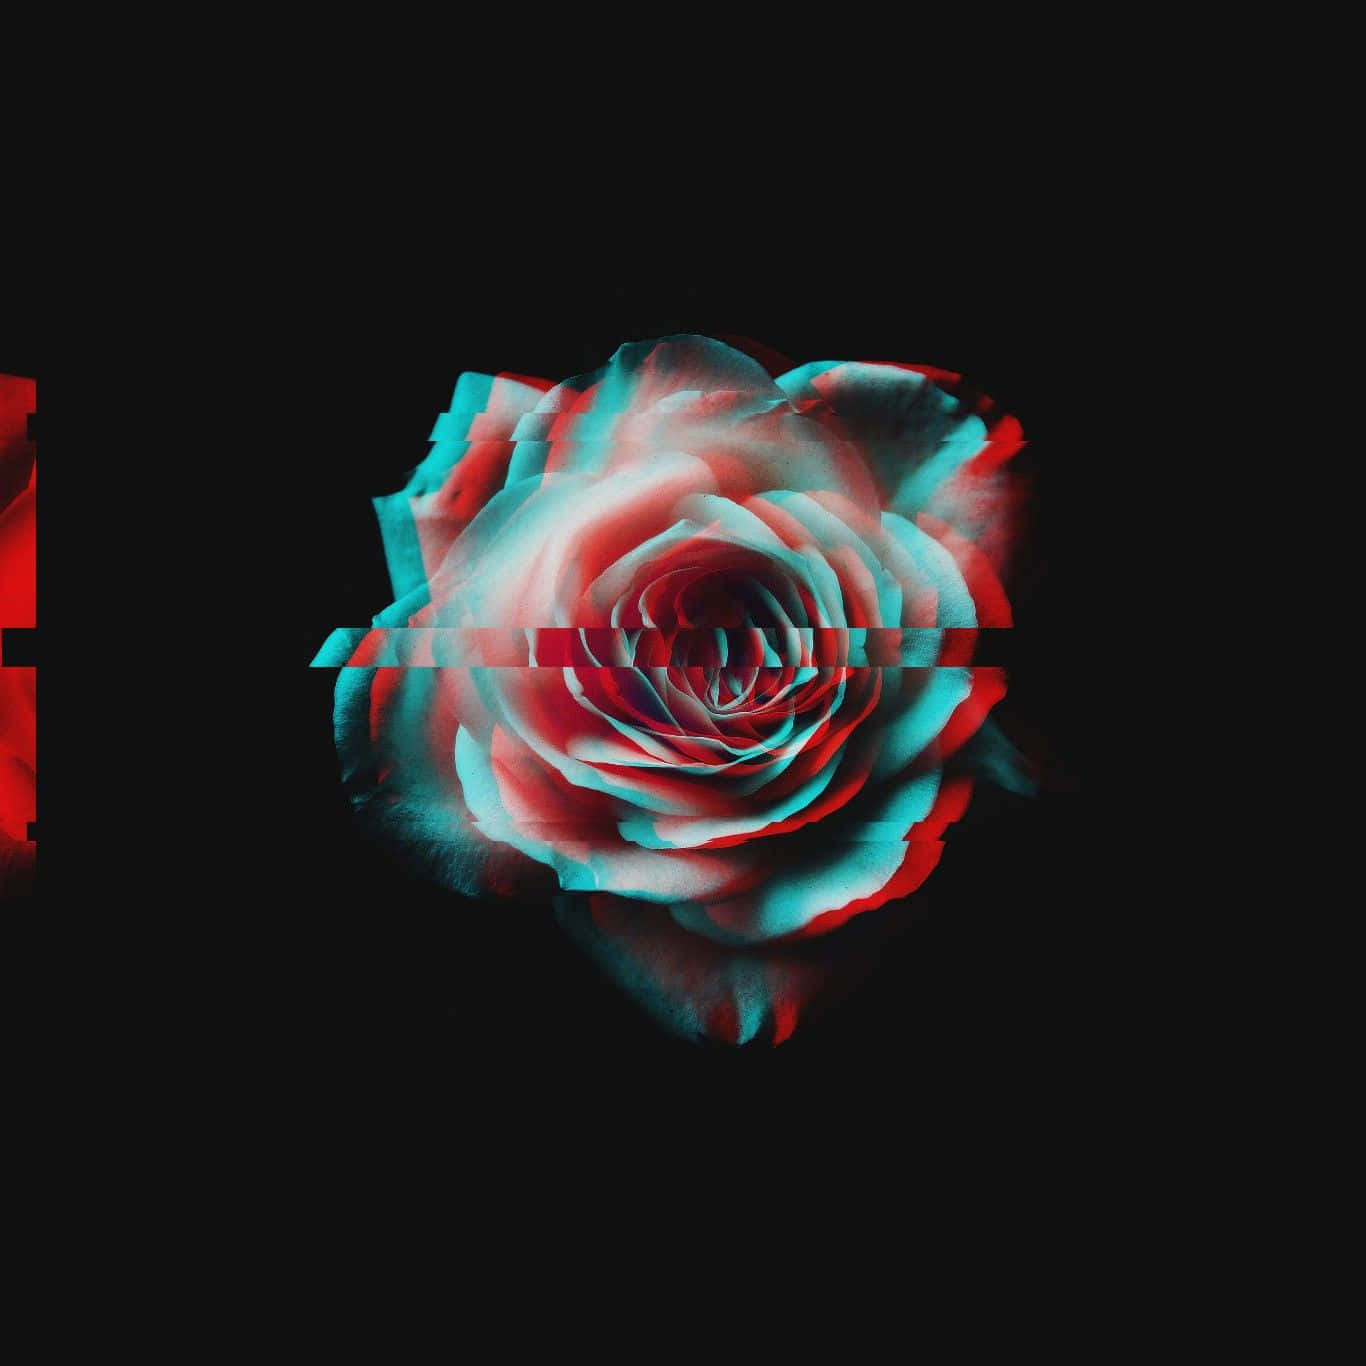 100+] Red Flower Aesthetic Wallpapers | Wallpapers.com